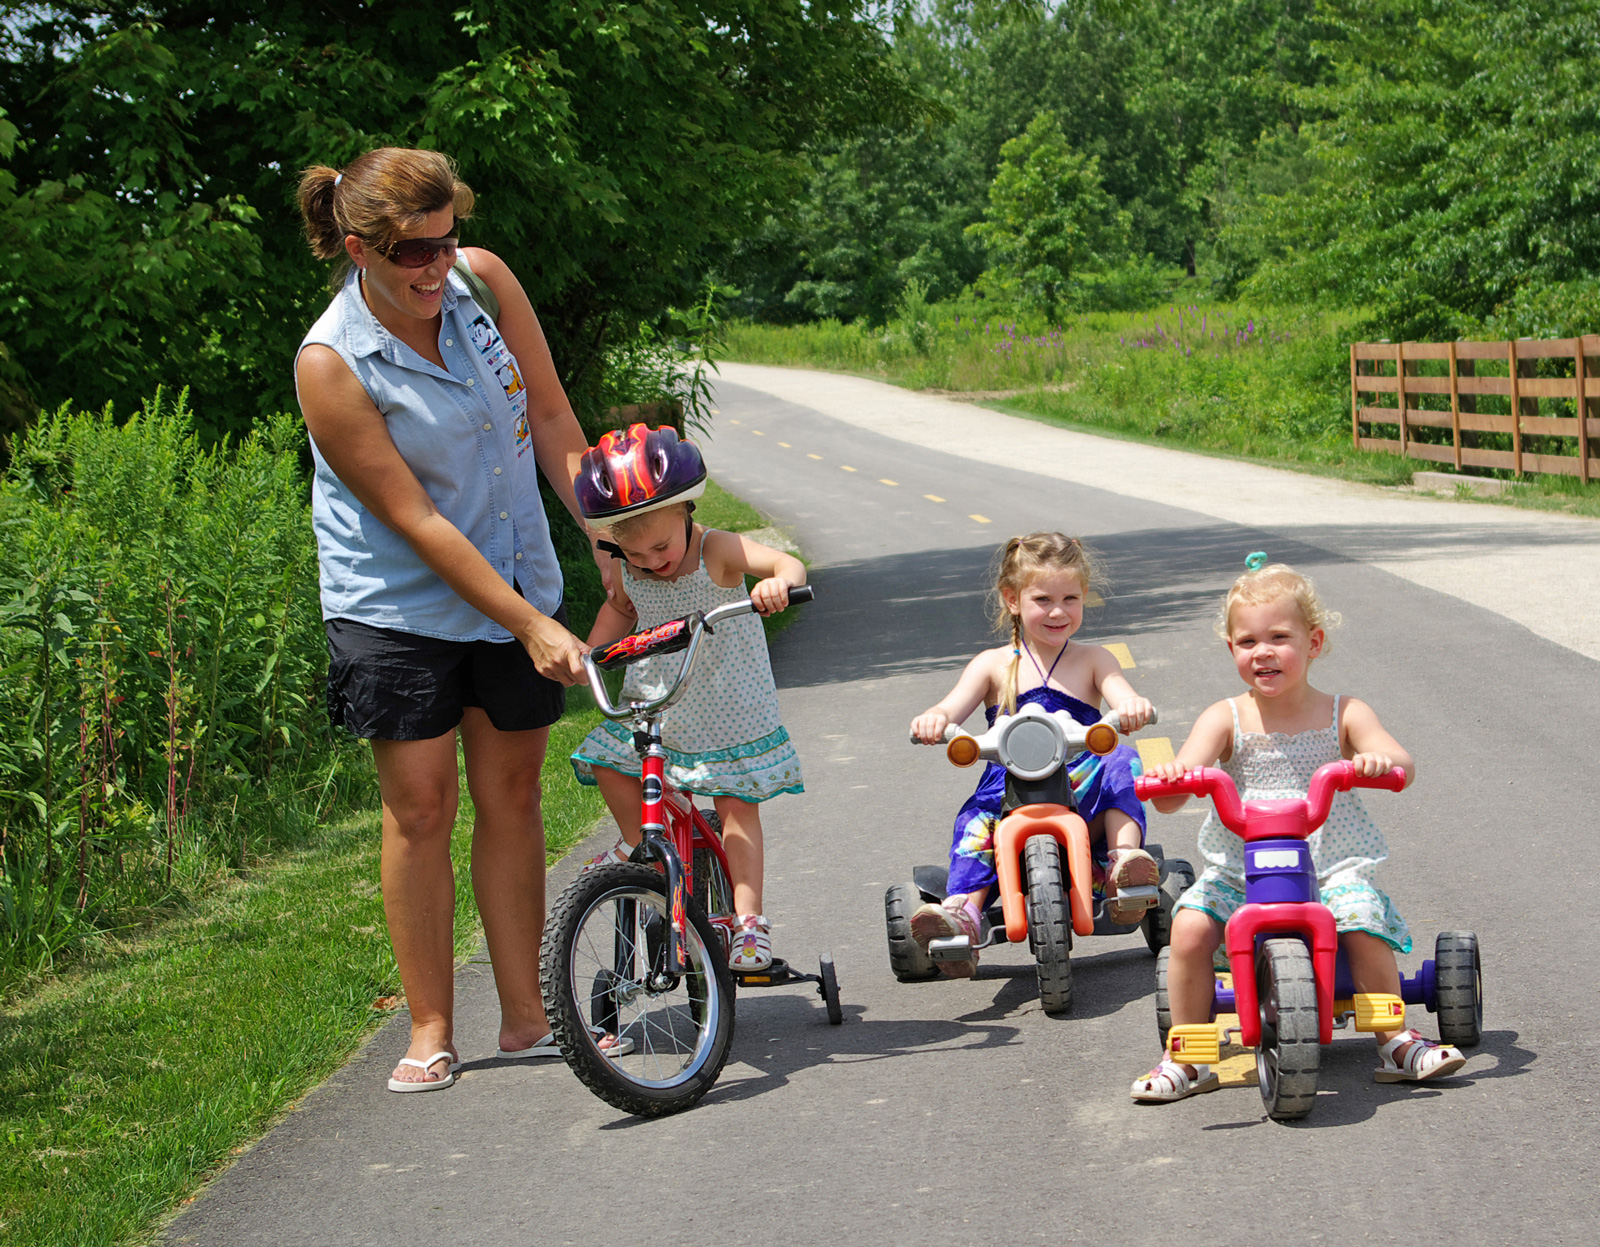 Three young tricyclists with adult supervision on the Multi-use Trail at Blacklick Woods.